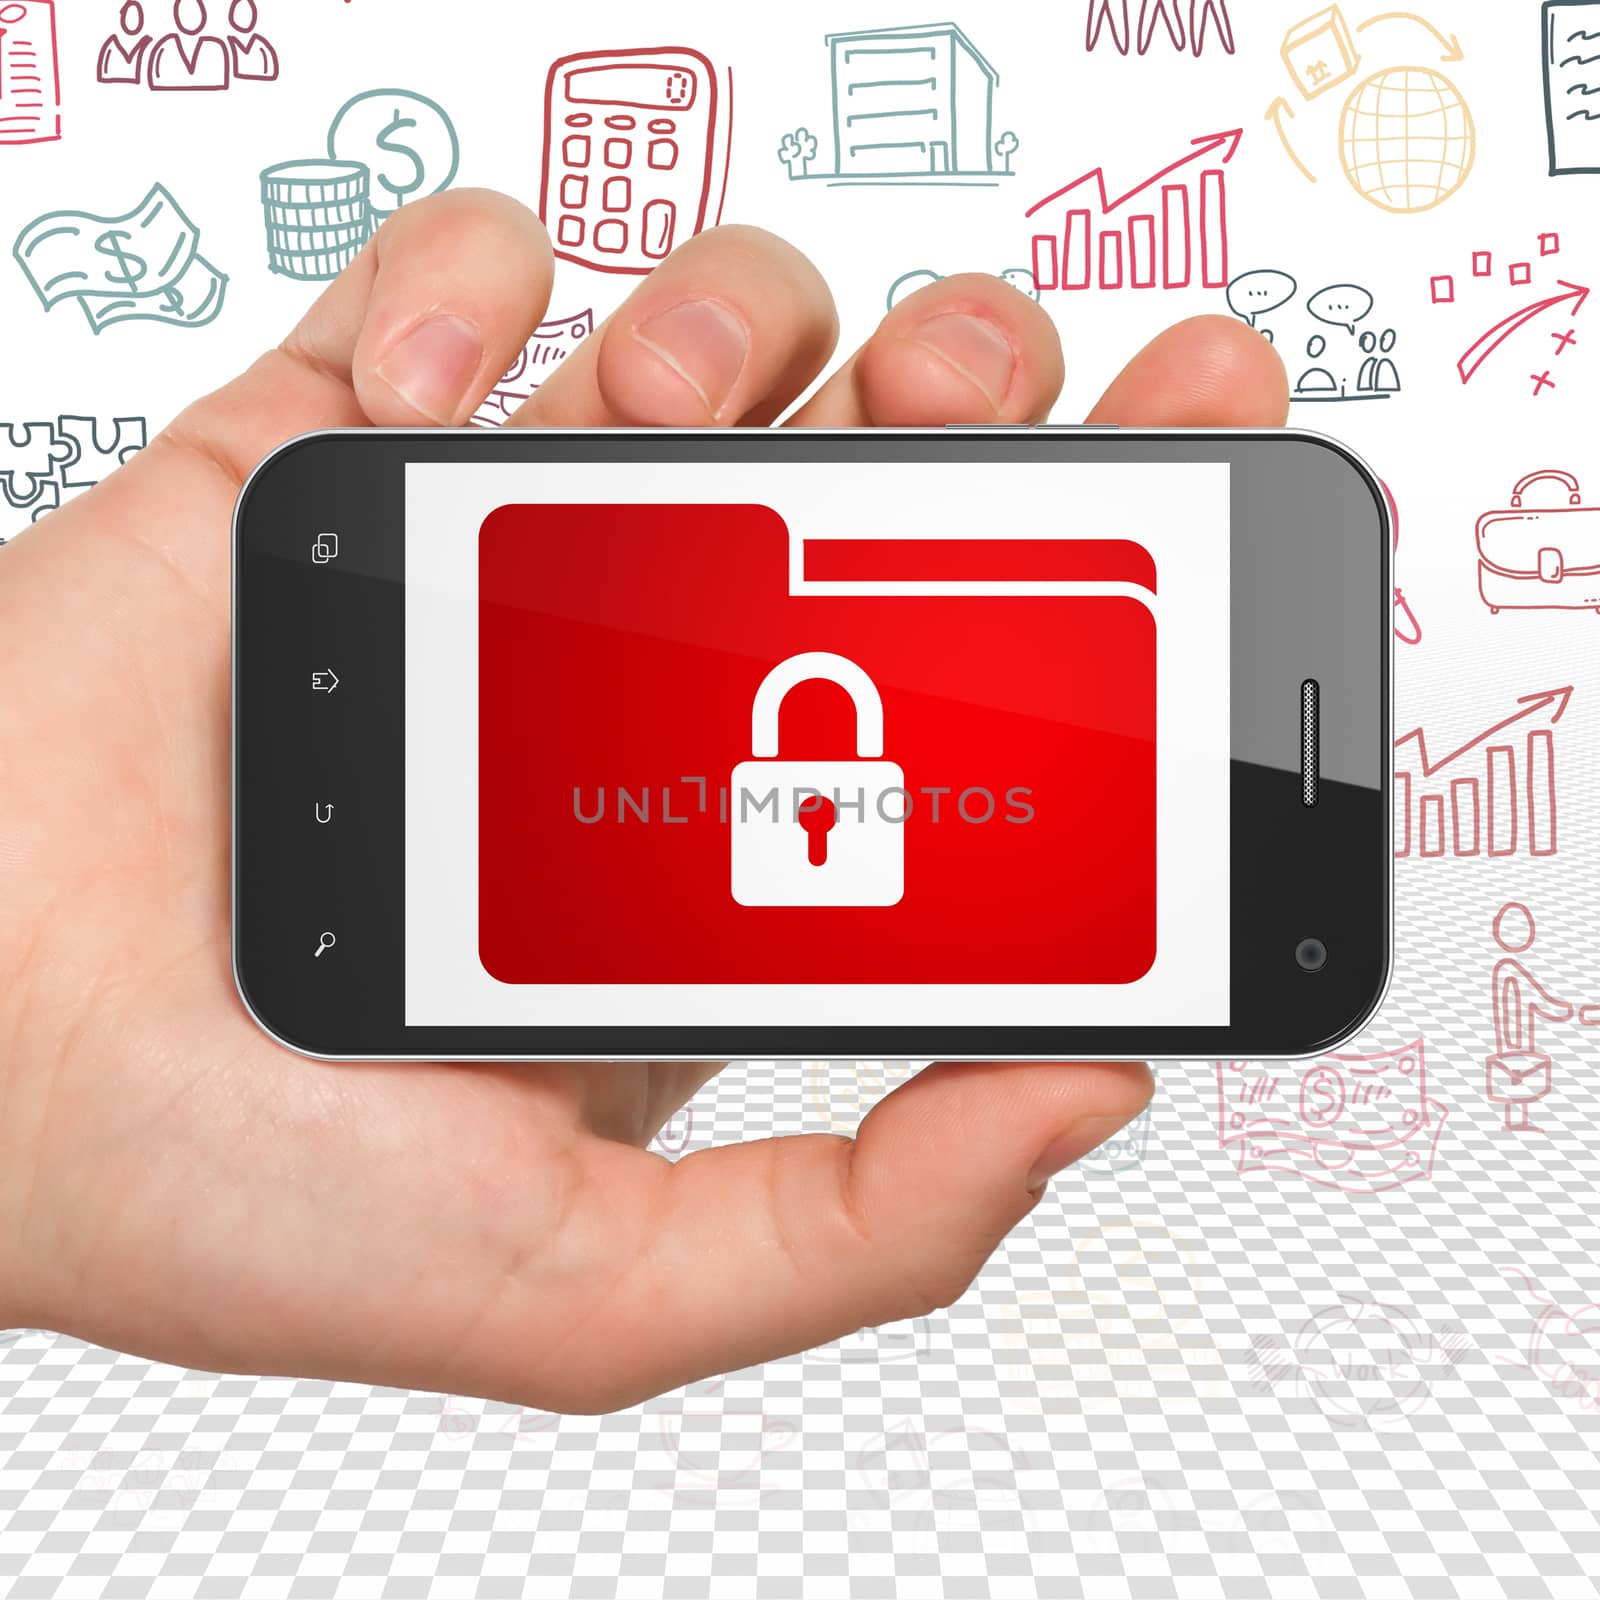 Business concept: Hand Holding Smartphone with  red Folder With Lock icon on display,  Hand Drawn Business Icons background